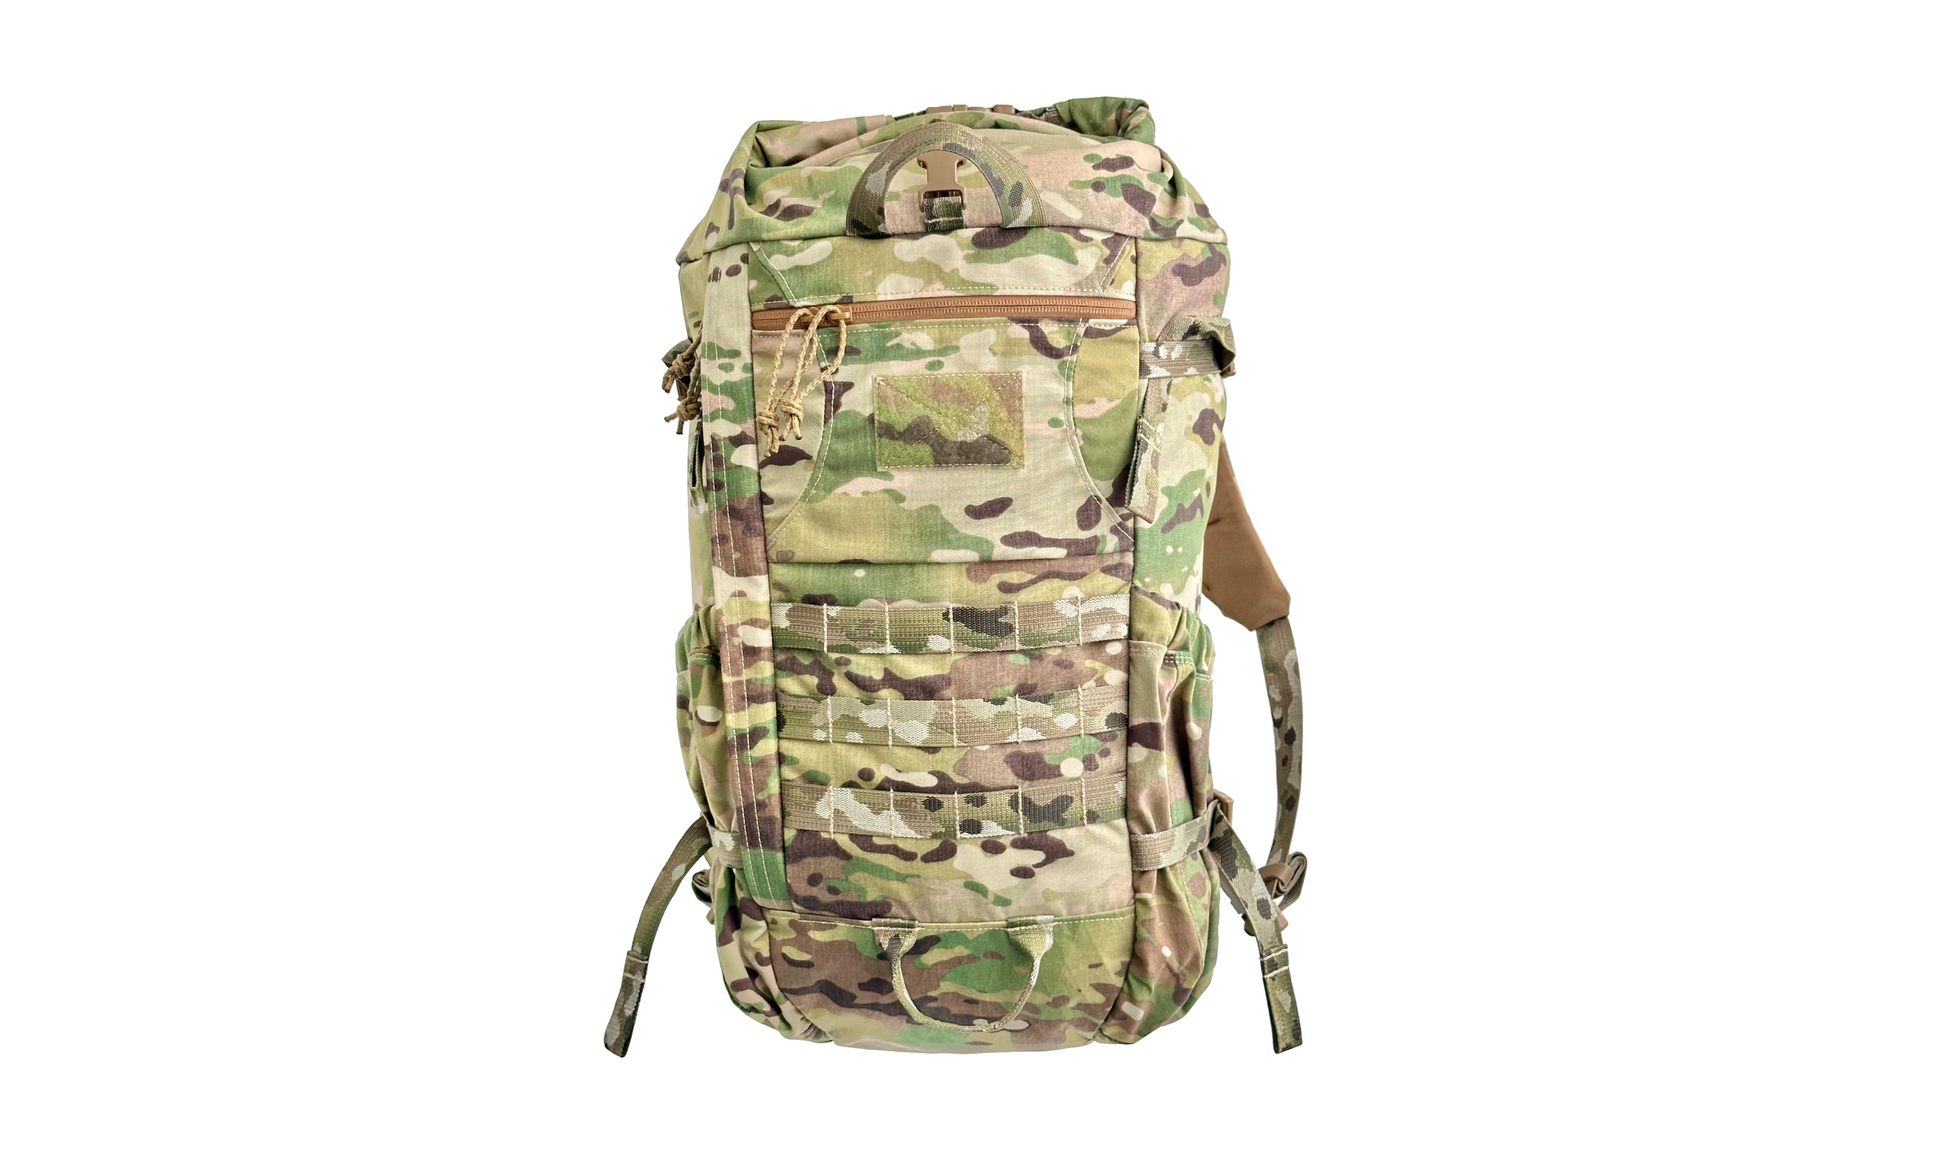 Gen 2 Daypack with lid removed